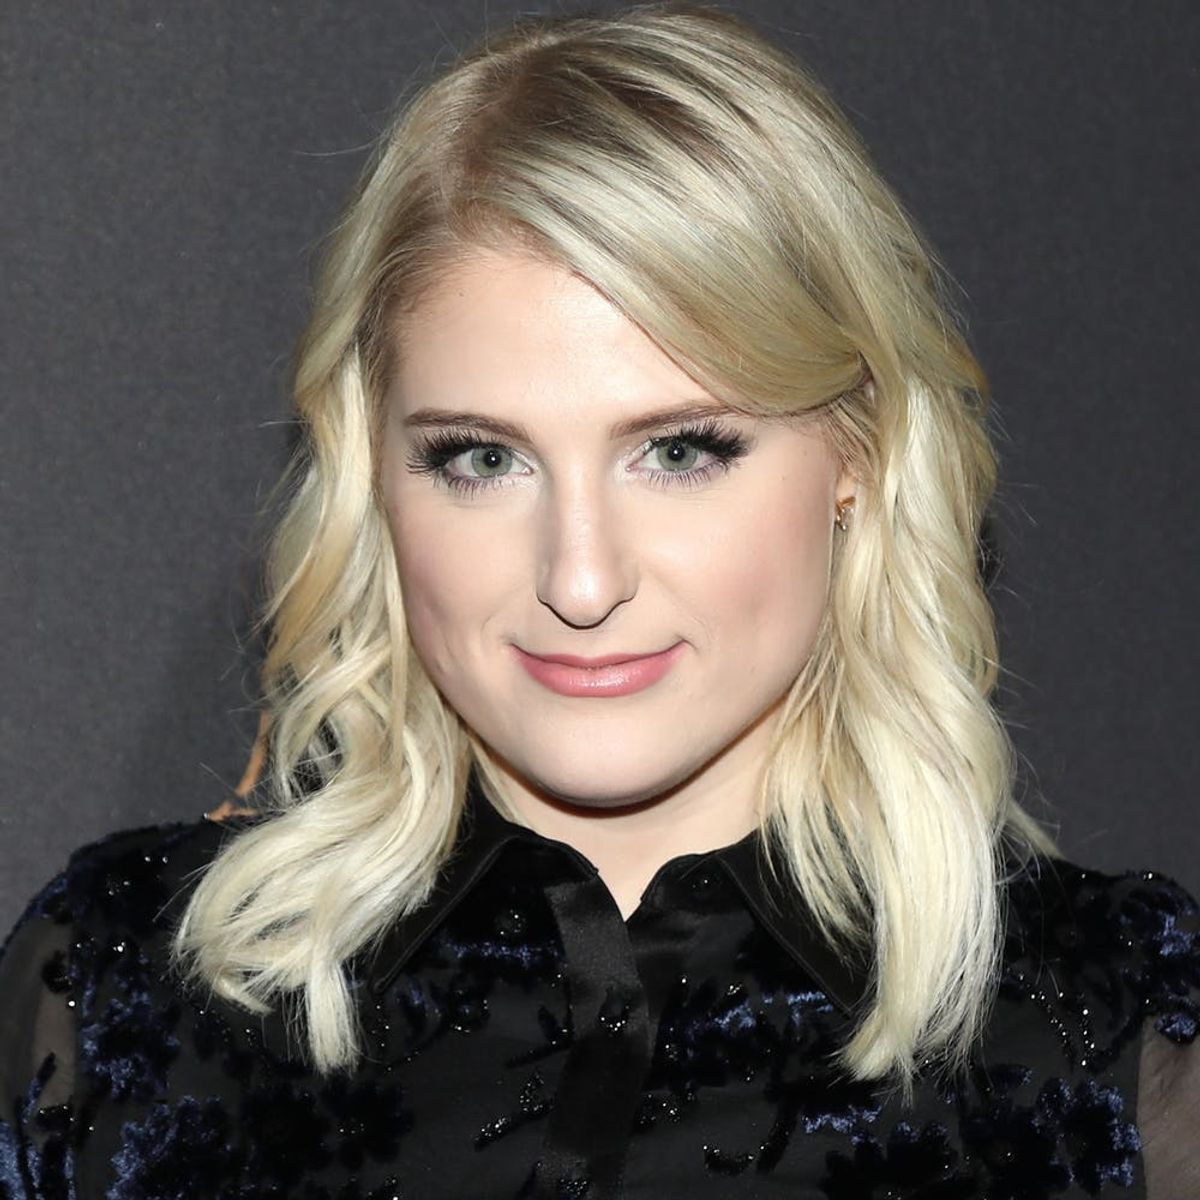 Spy Kids Star Daryl Sabara Proposed to Meghan Trainor for Her Birthday… and She Said Yes!